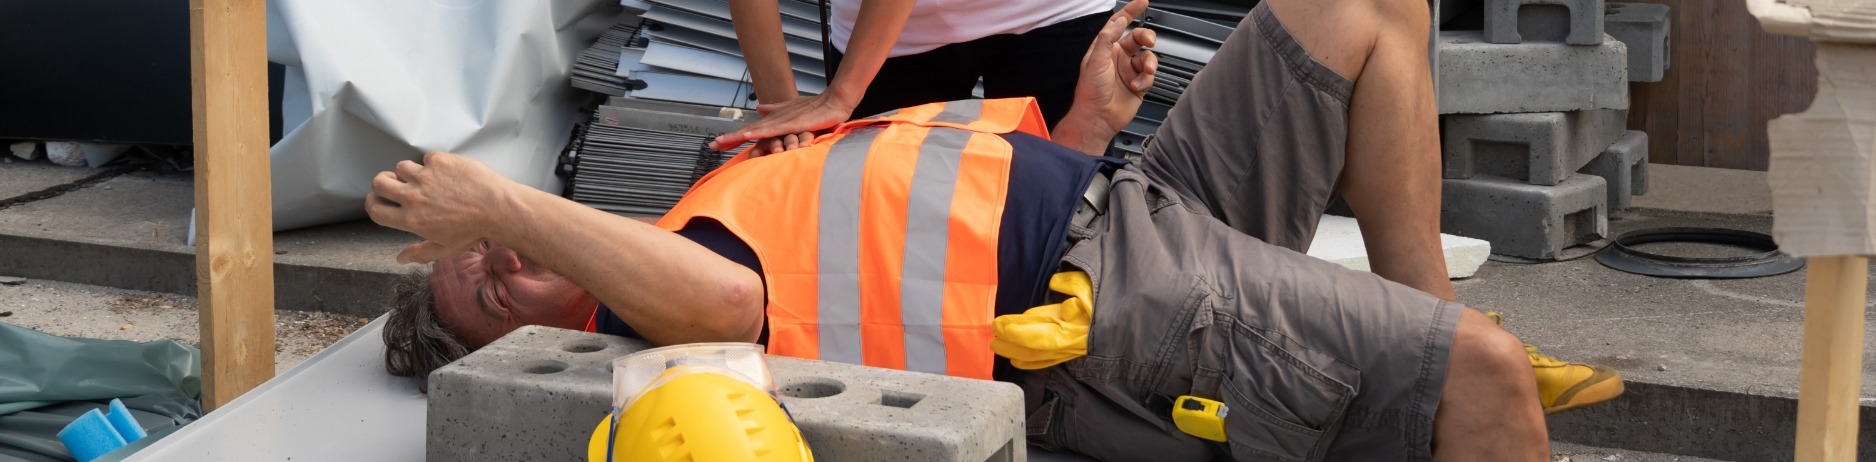 Construction worker on back in pain receiving CPR after apparent workplace accident